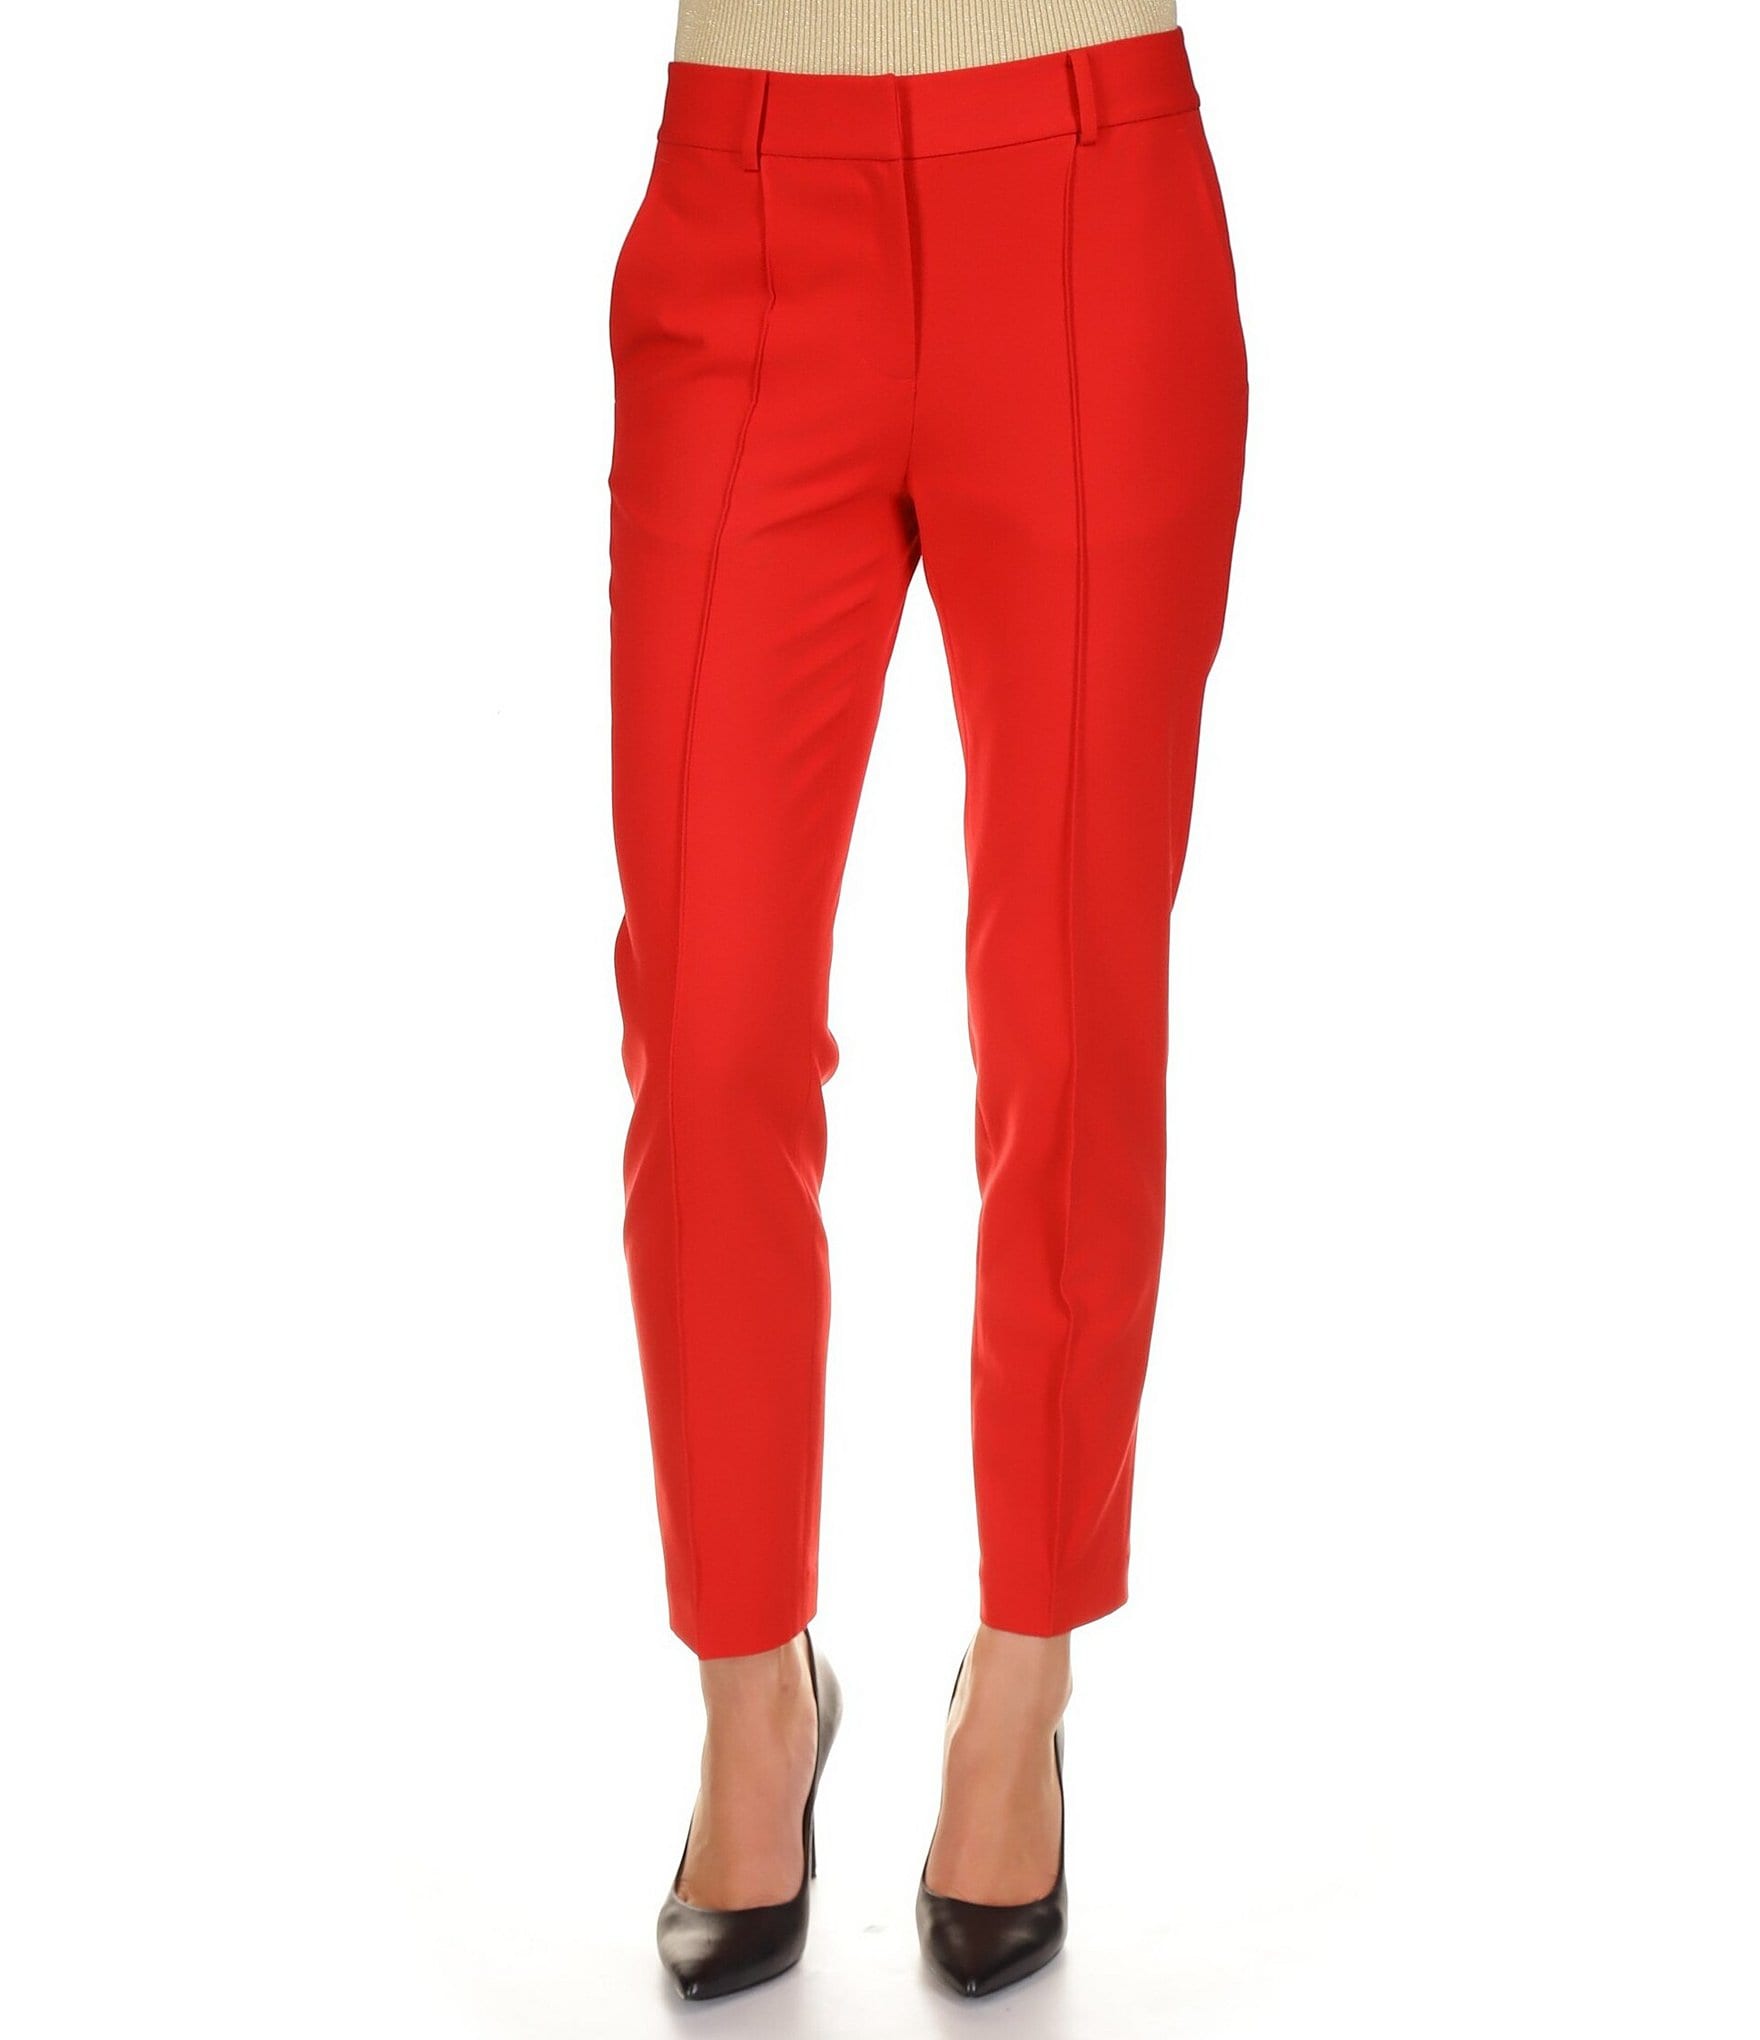 Love the look | Red pants outfit, Fashion outfits, Style